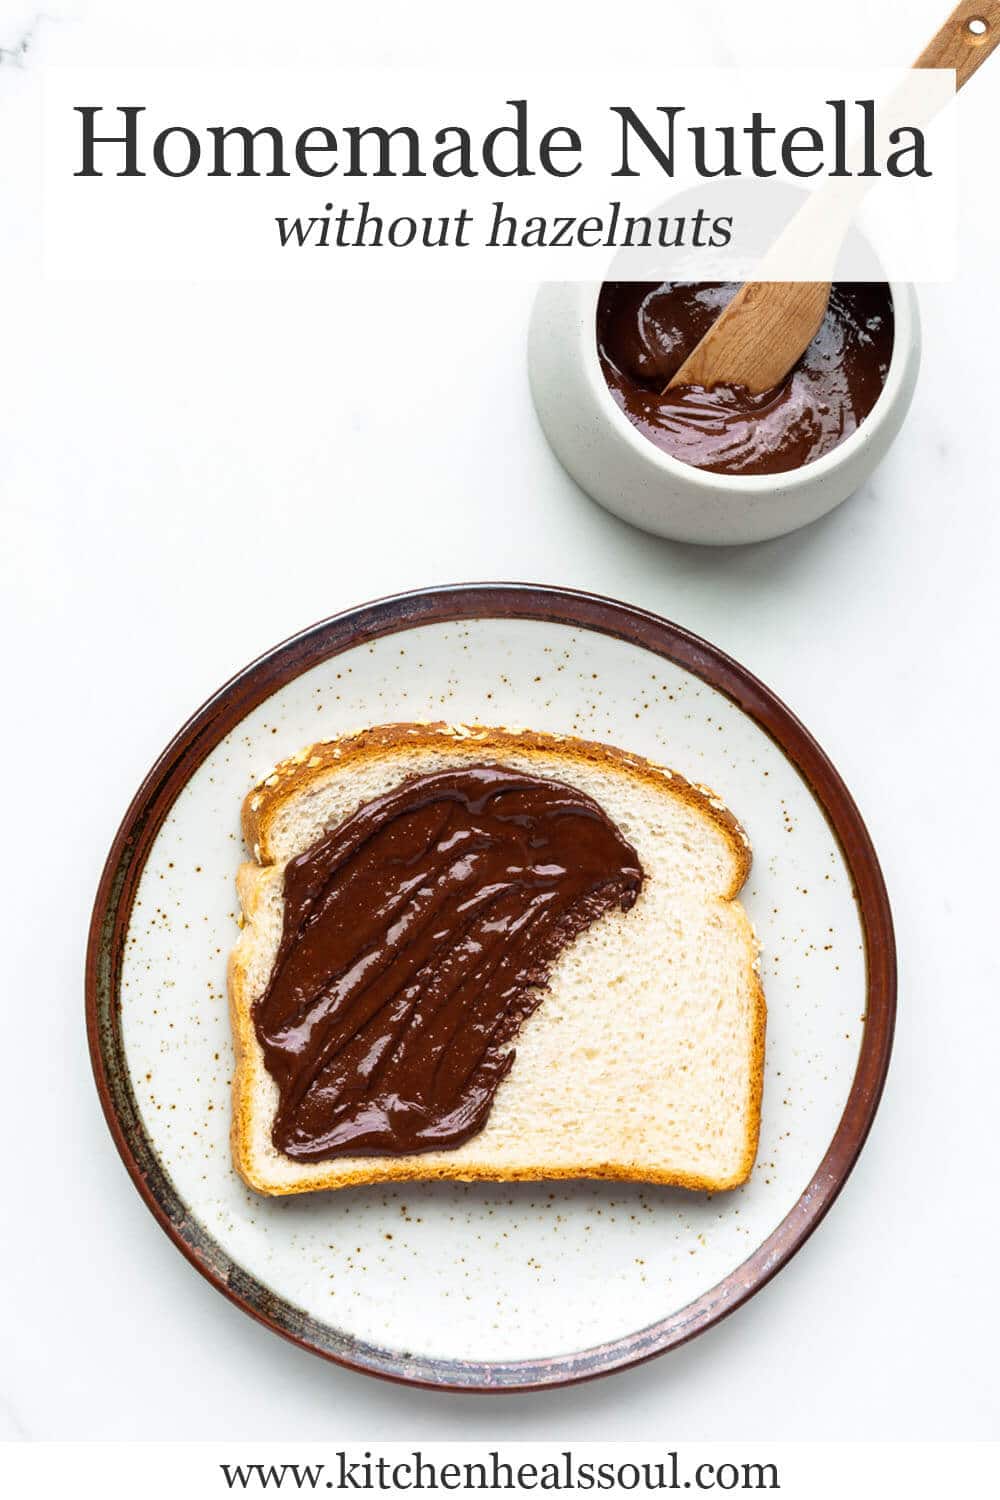 Homemade chocolate peanut butter spread on white bread on ceramic speckled plate with brown rim, with bowl of spread and wood knife nearby.